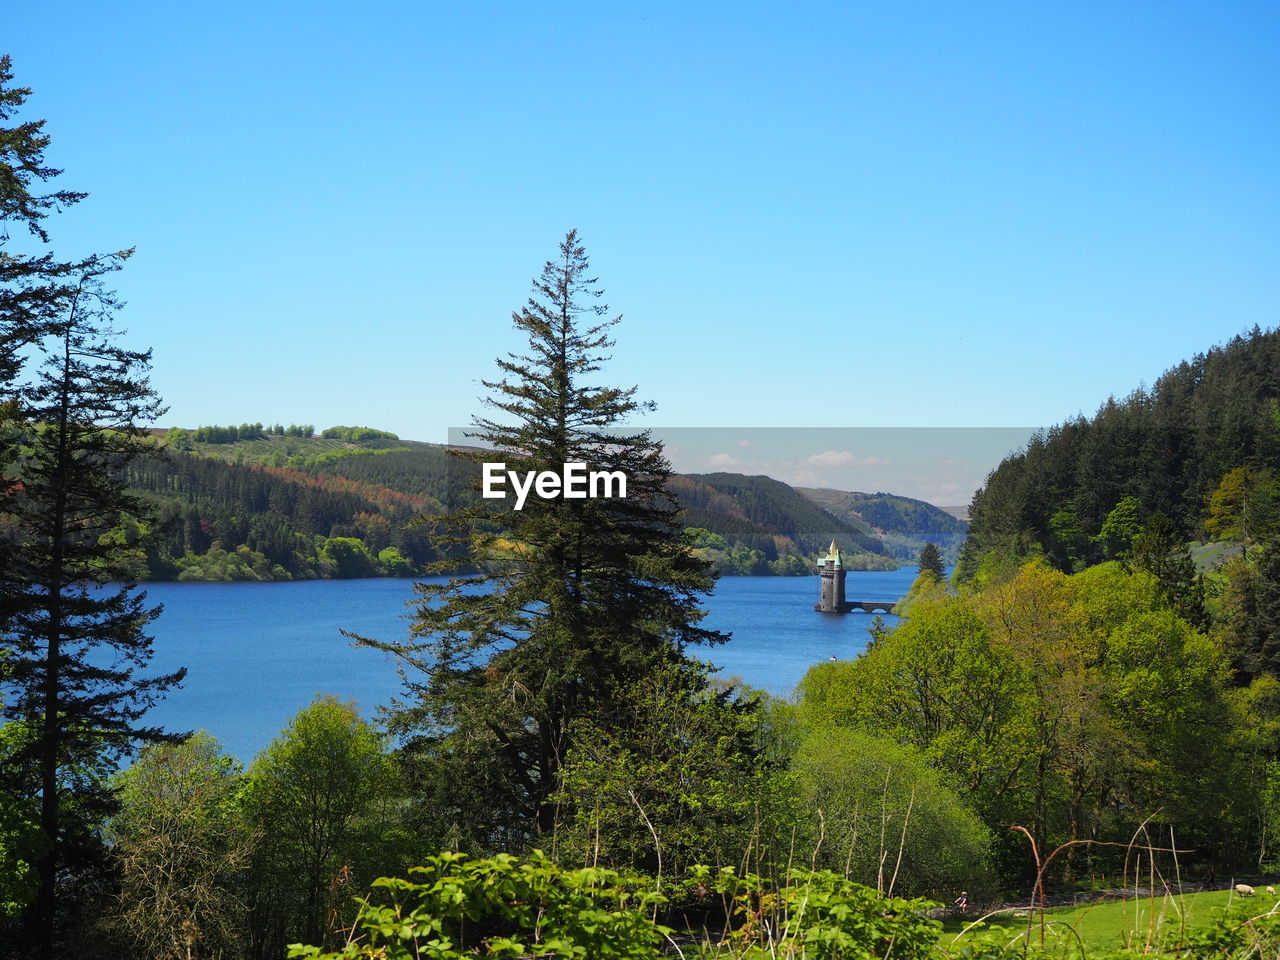 Water tower of lake vyrnwy surrounded by forestry and clear blue skies 